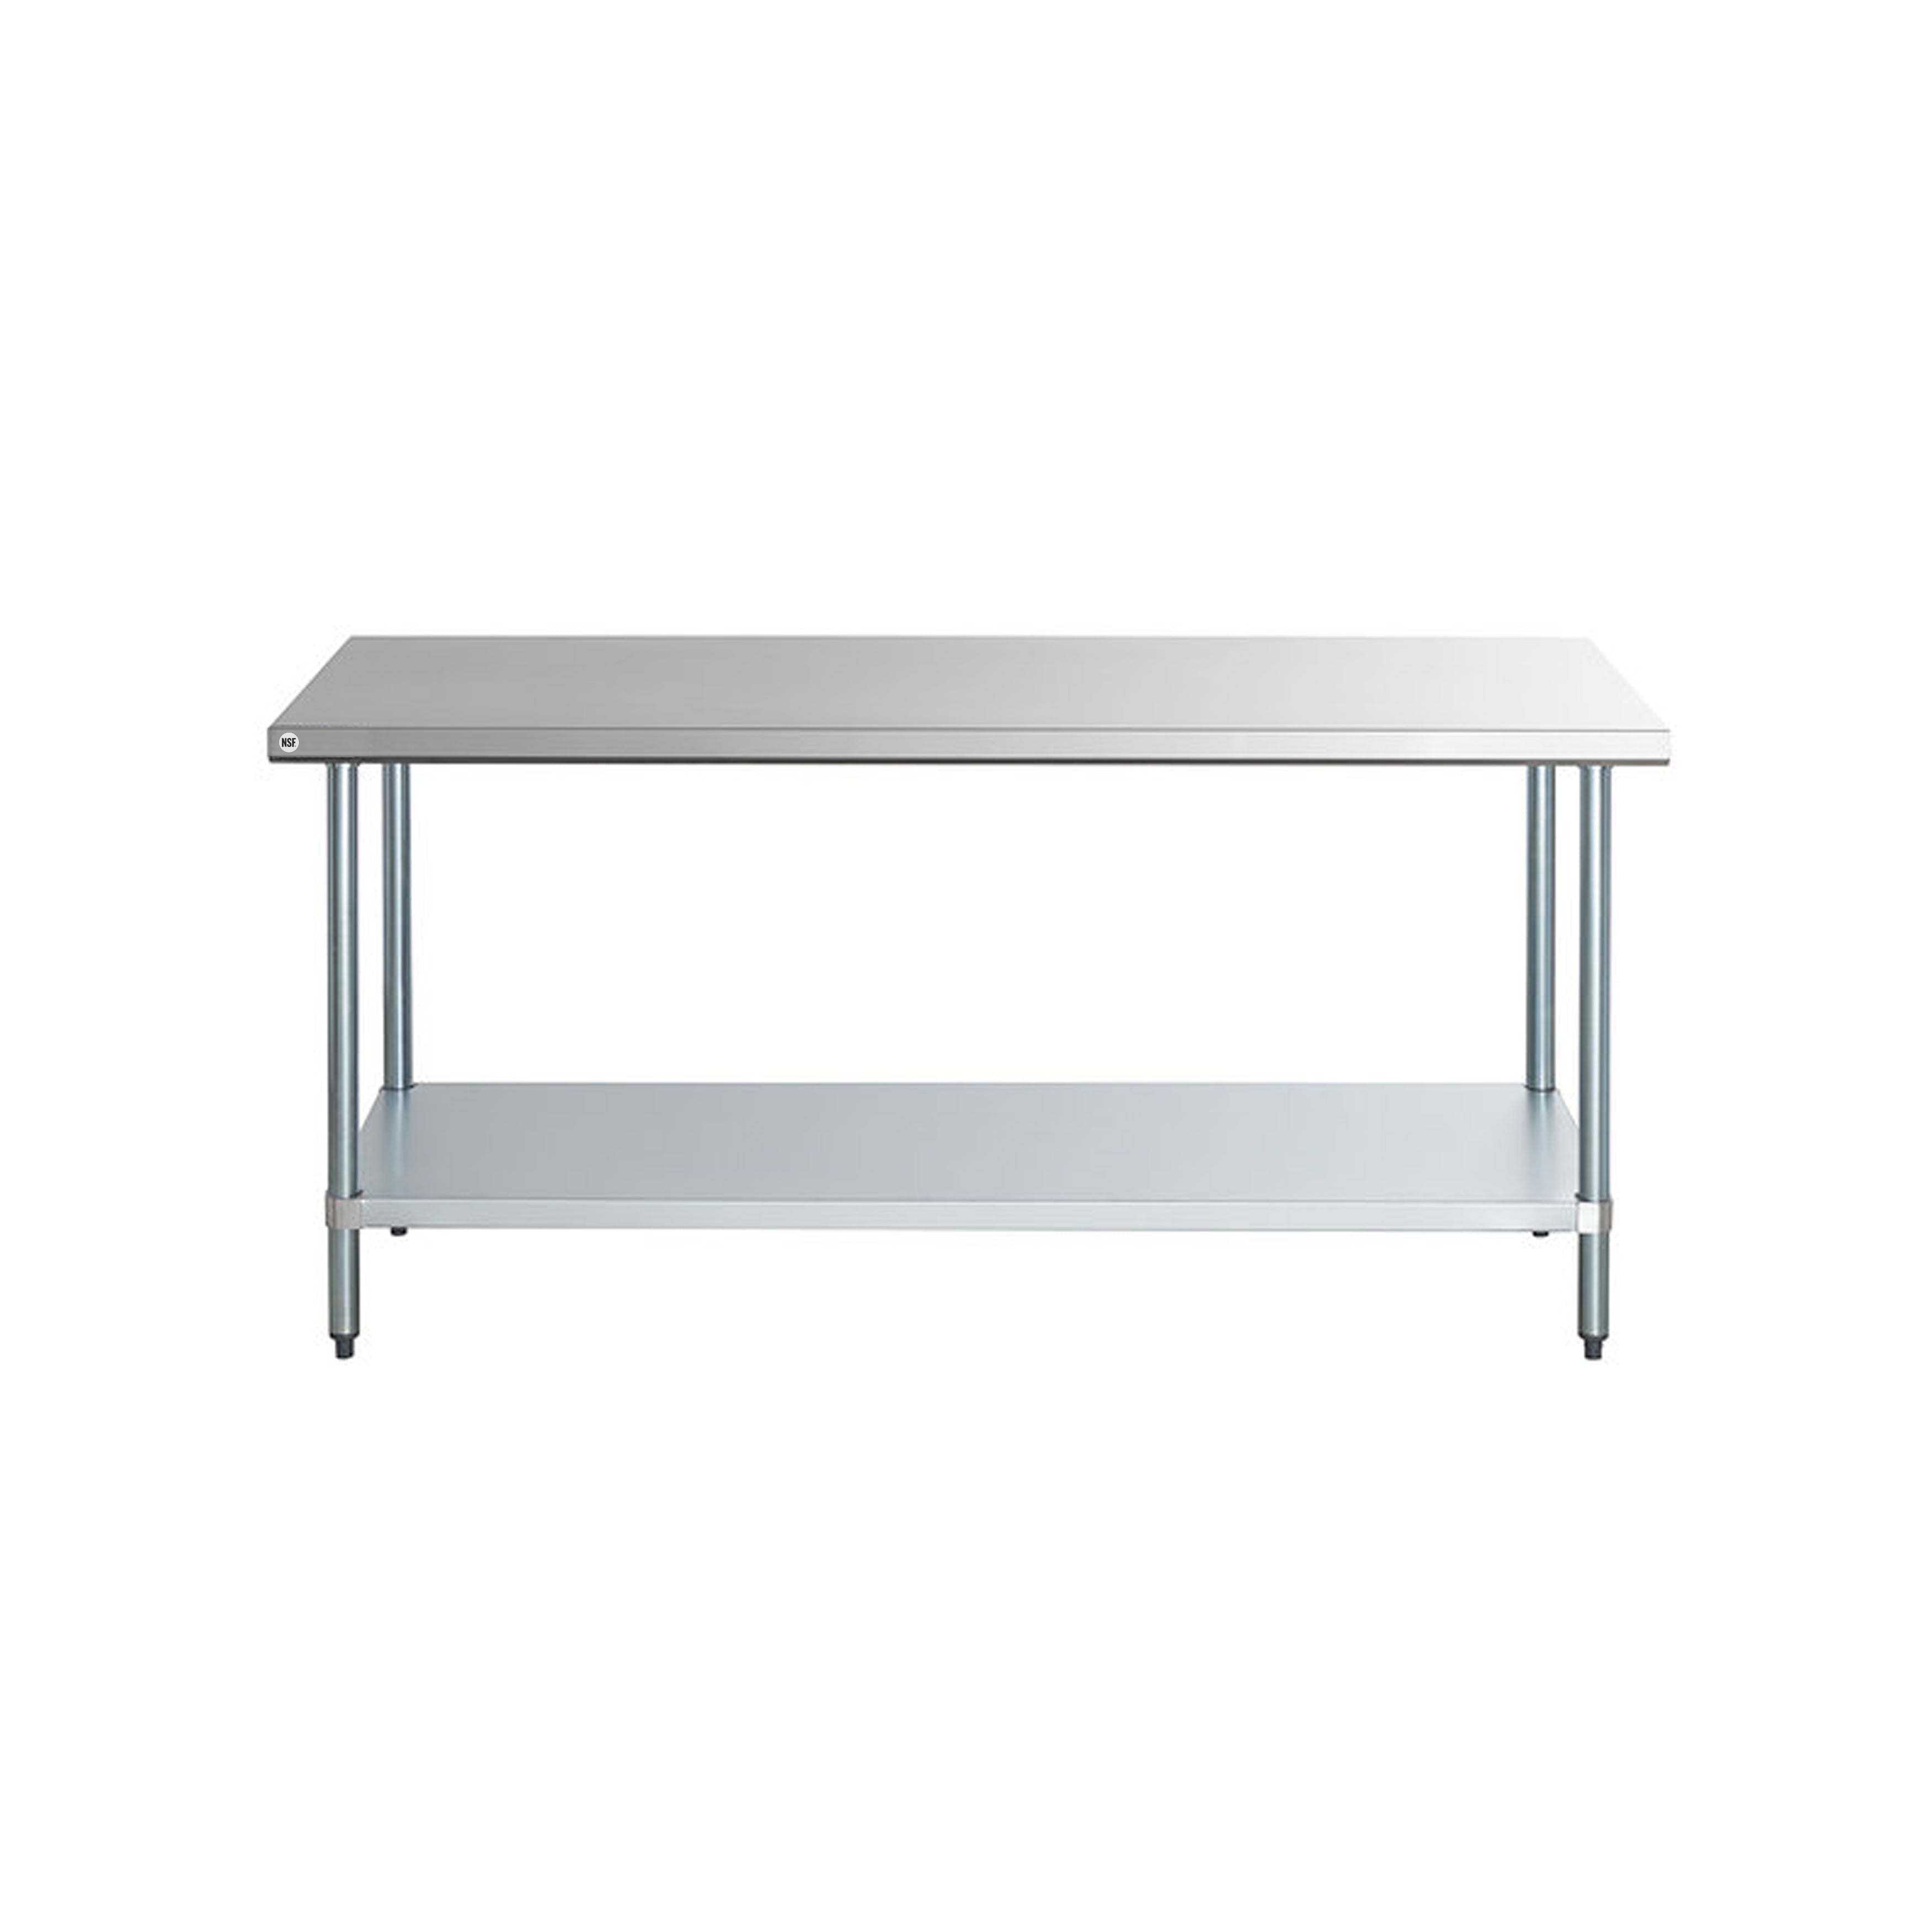 Omcan - 19139, Commercial 24" x 60" Stainless Steel Kitchen Work Table 1100lbs Heavy Duty